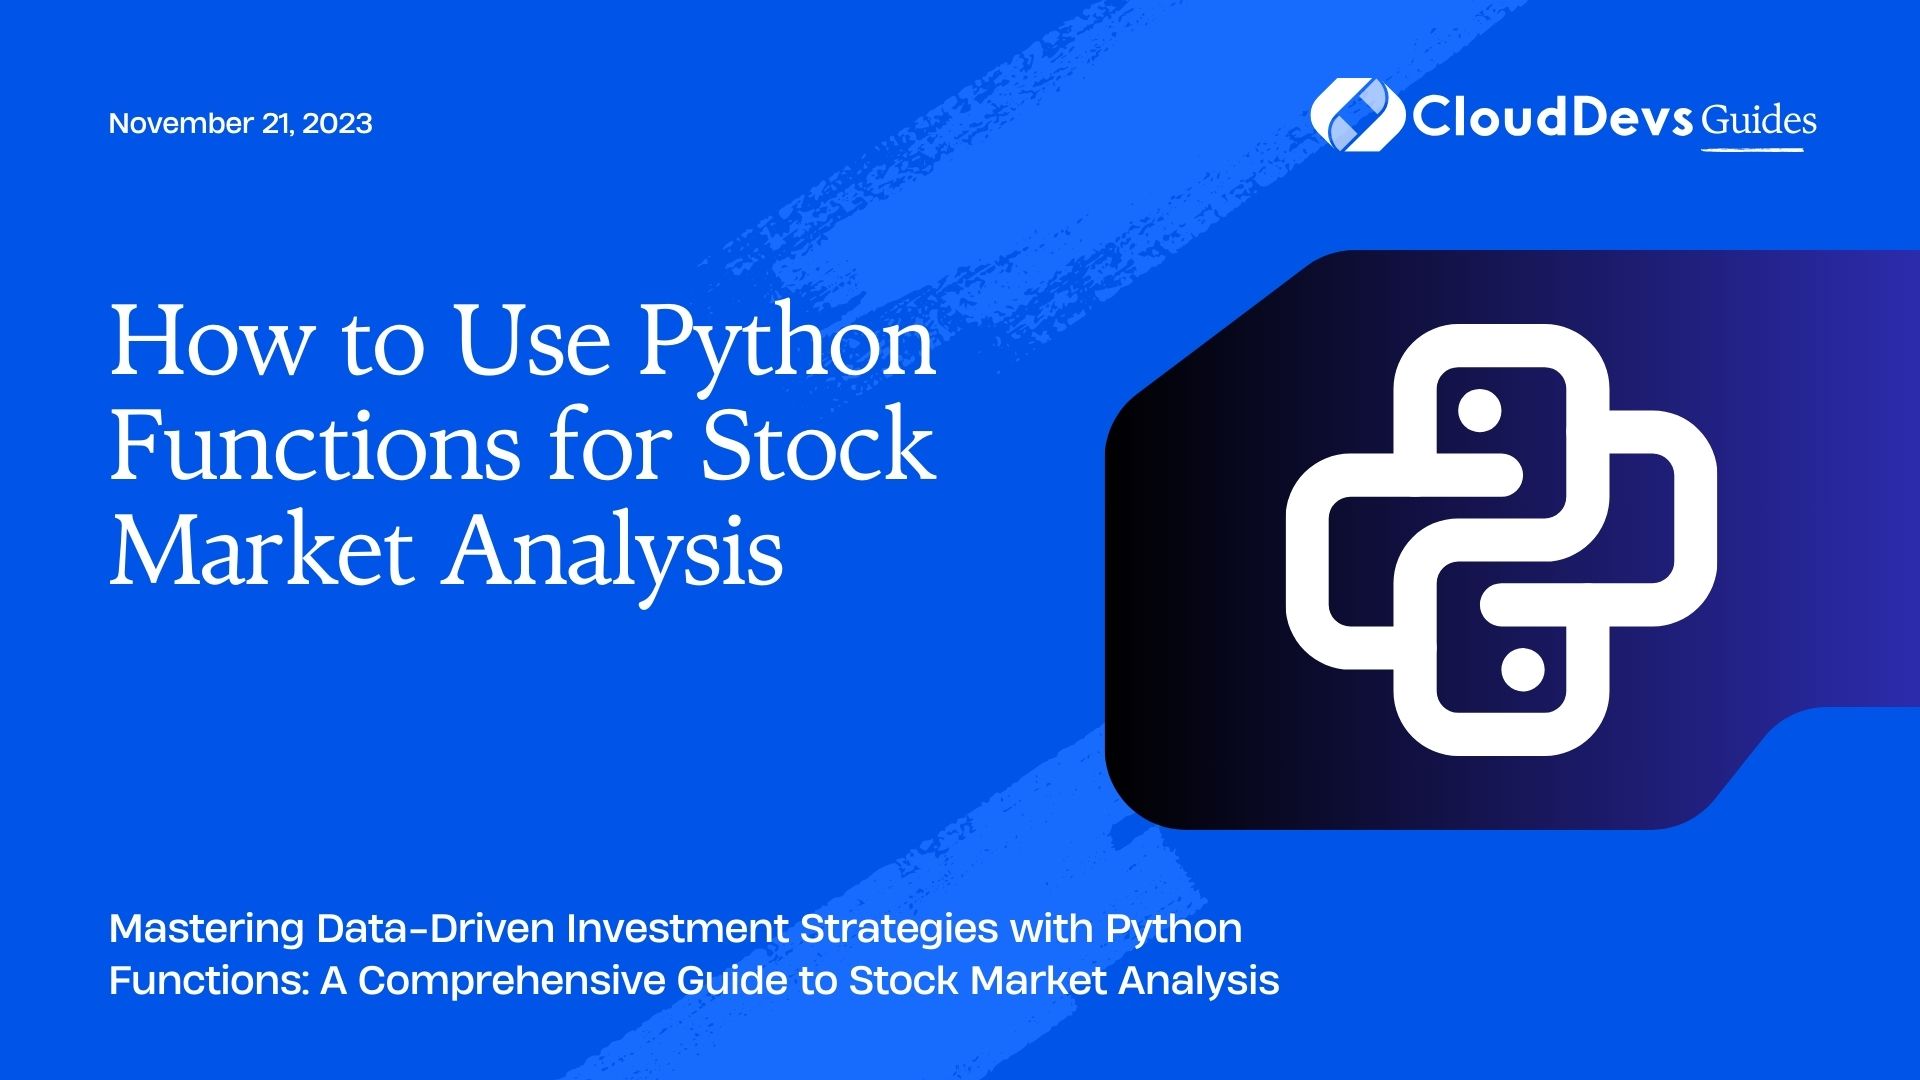 How to Use Python Functions for Stock Market Analysis